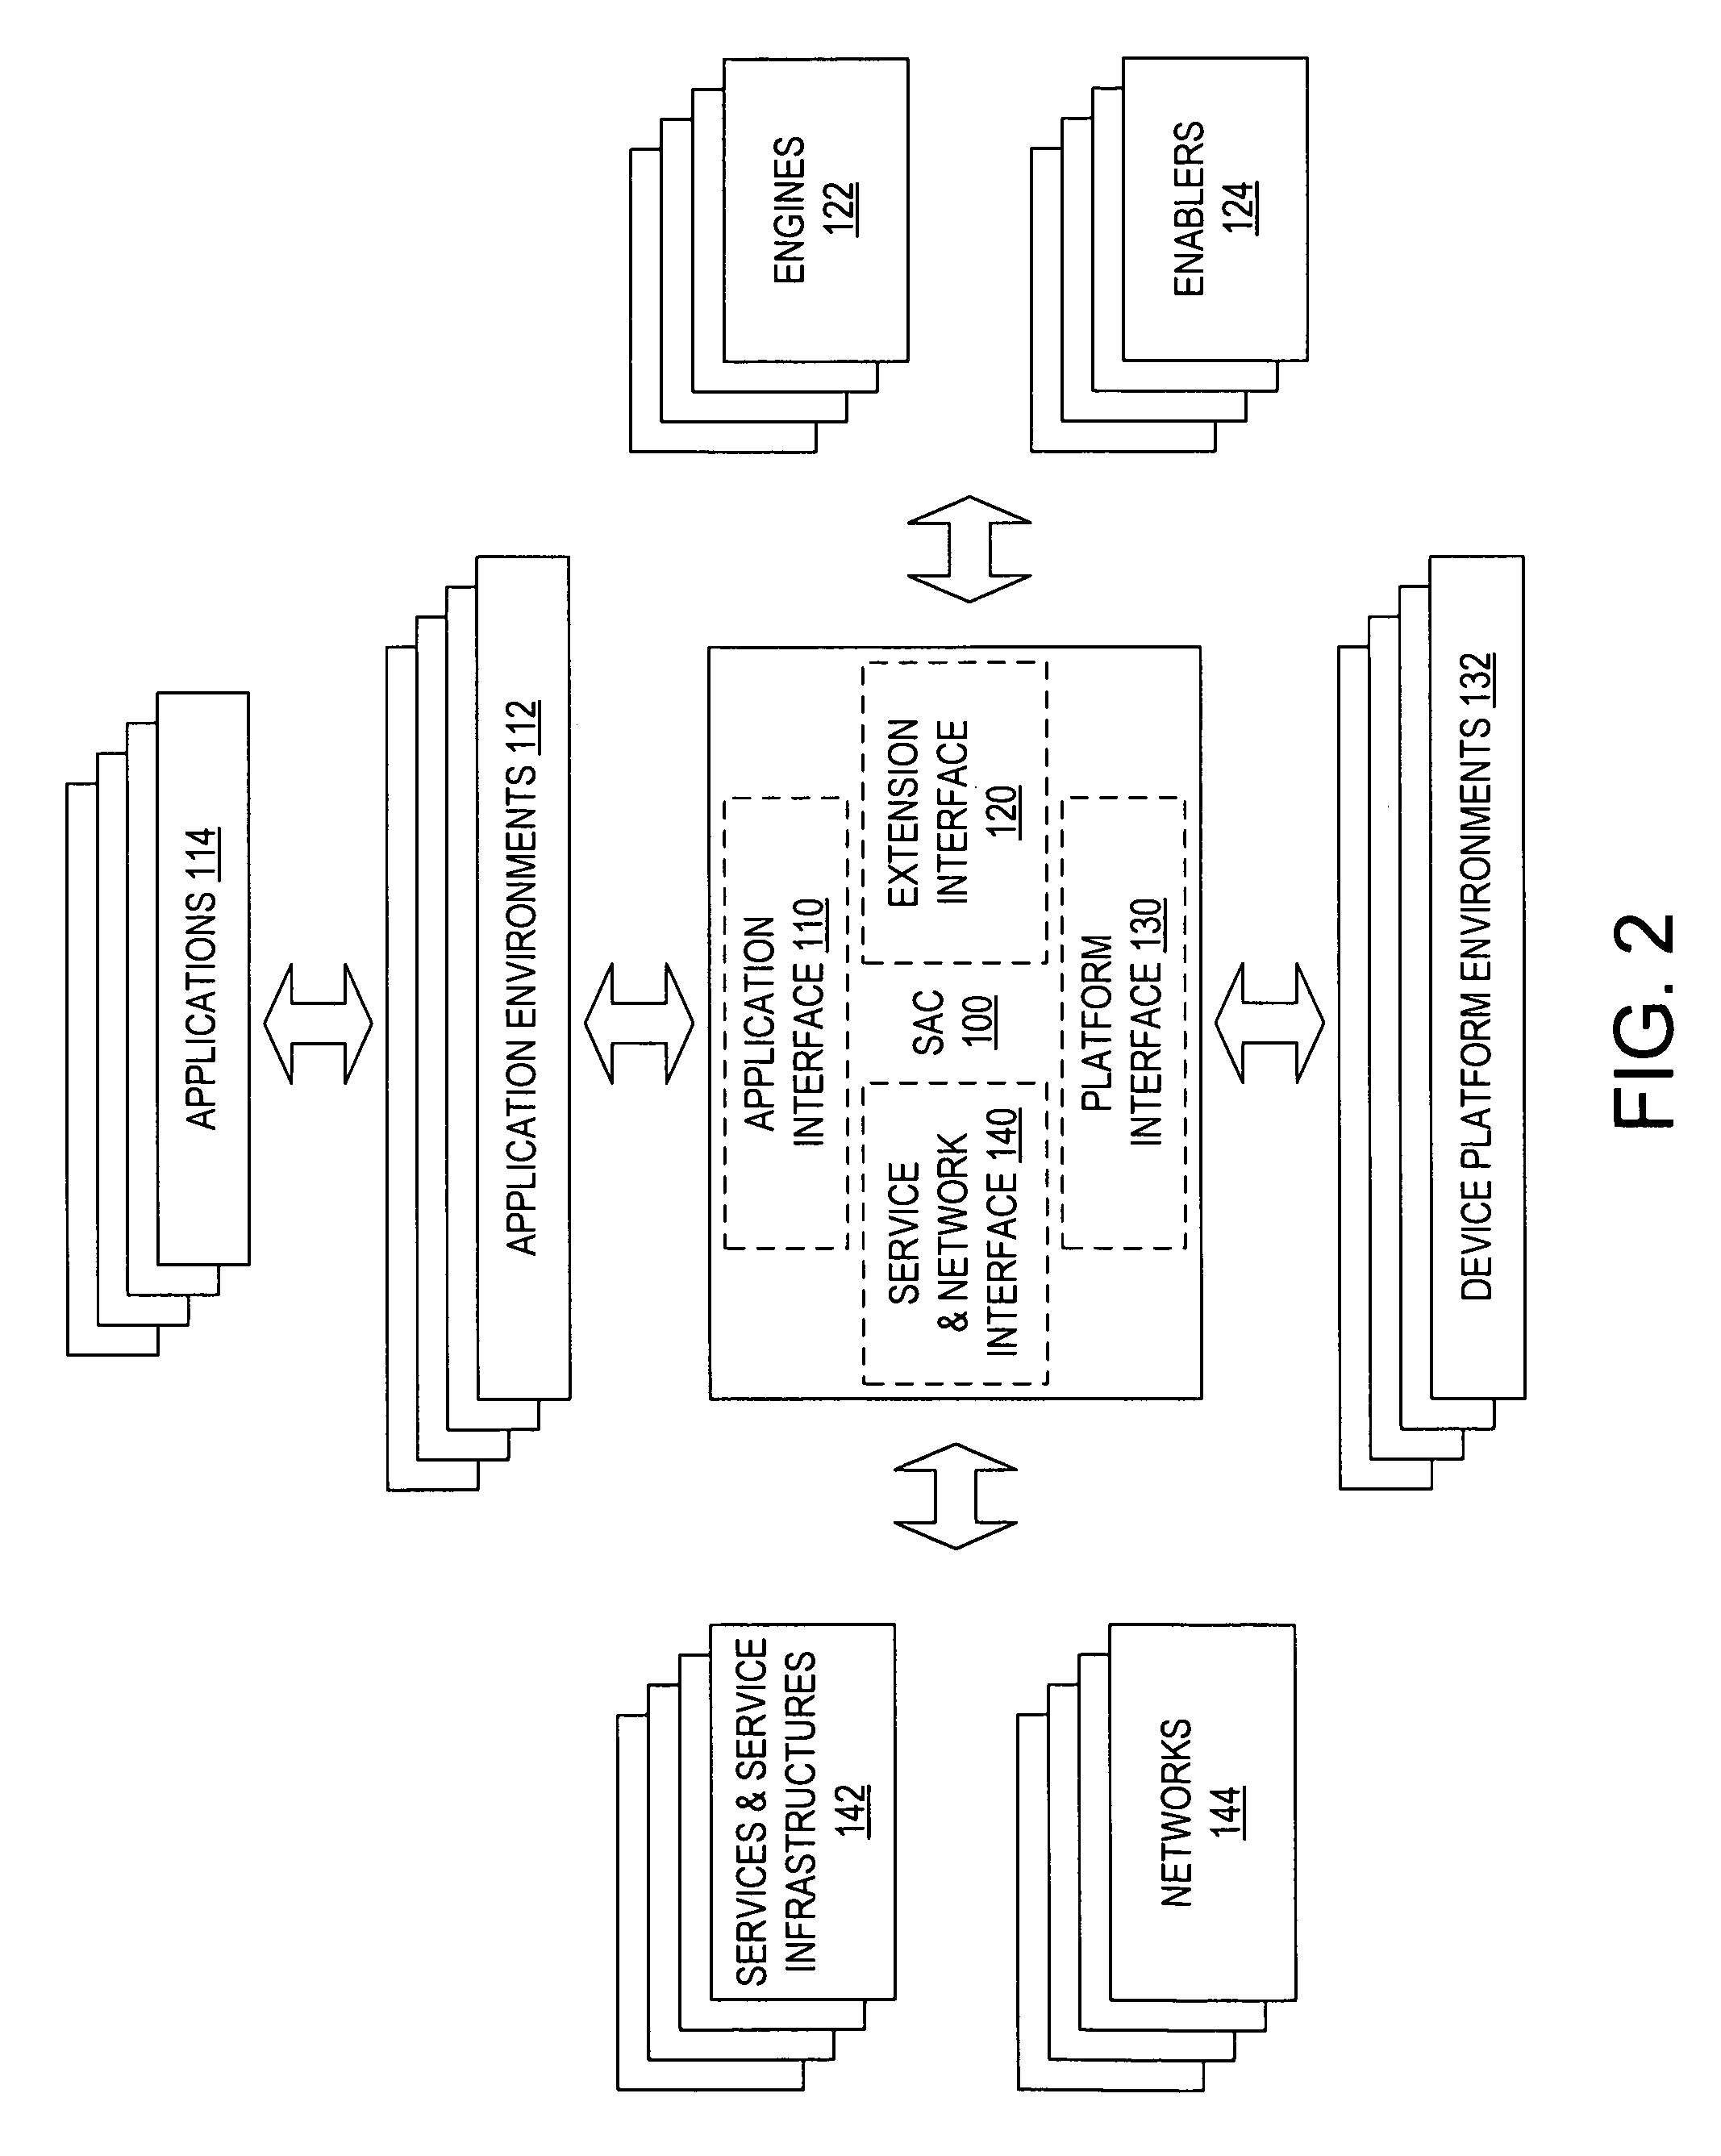 System, method and apparatus for controlling multiple applications and services on a digital electronic device